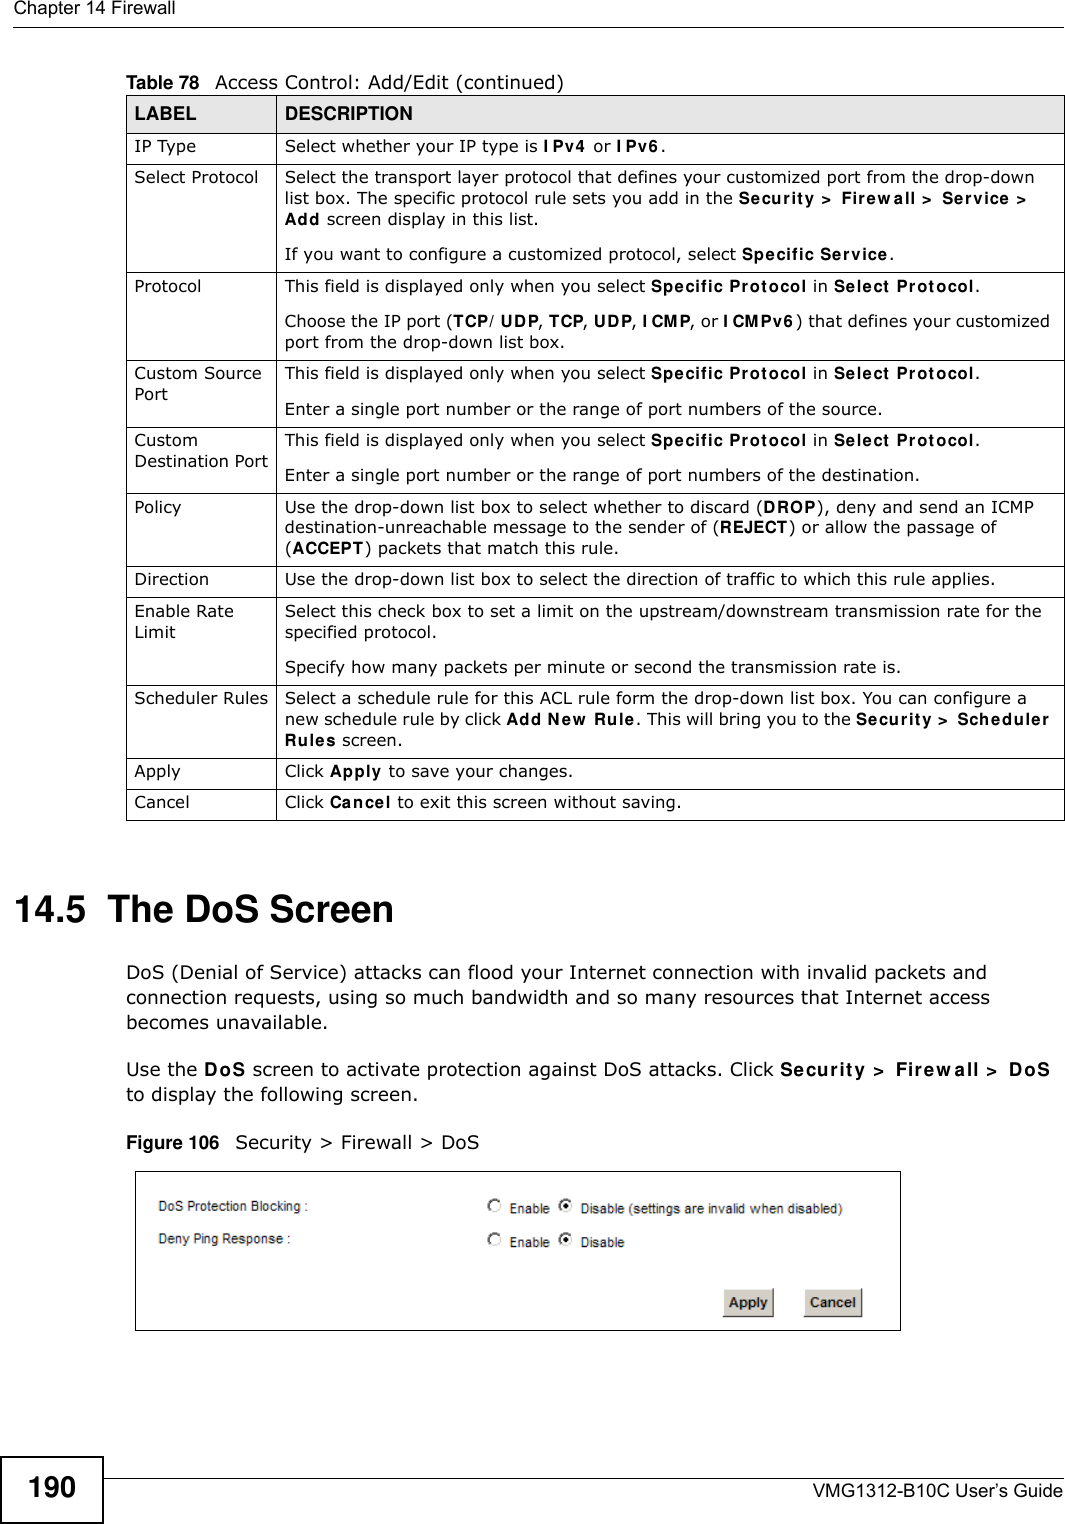 Chapter 14 FirewallVMG1312-B10C User’s Guide19014.5  The DoS ScreenDoS (Denial of Service) attacks can flood your Internet connection with invalid packets and connection requests, using so much bandwidth and so many resources that Internet access becomes unavailable. Use the DoS screen to activate protection against DoS attacks. Click Secur it y &gt;  Firew all &gt;  DoS to display the following screen. Figure 106   Security &gt; Firewall &gt; DoSIP Type Select whether your IP type is I Pv4  or I Pv6 . Select Protocol Select the transport layer protocol that defines your customized port from the drop-down list box. The specific protocol rule sets you add in the Securit y &gt;  Fire w a ll &gt;  Service  &gt;  Add screen display in this list. If you want to configure a customized protocol, select Spe cific Se r vice.Protocol This field is displayed only when you select Spe cific Pr ot ocol in Se lect  Pr ot ocol.Choose the IP port (TCP/ UDP, TCP, UDP, I CMP, or I CM Pv6 ) that defines your customized port from the drop-down list box.Custom Source PortThis field is displayed only when you select Spe cific Pr ot ocol in Sele ct  Pr ot ocol.Enter a single port number or the range of port numbers of the source.Custom Destination PortThis field is displayed only when you select Spe cific Pr ot ocol in Sele ct  Pr ot ocol.Enter a single port number or the range of port numbers of the destination.Policy Use the drop-down list box to select whether to discard (DROP), deny and send an ICMP destination-unreachable message to the sender of (REJECT) or allow the passage of (ACCEPT) packets that match this rule.Direction  Use the drop-down list box to select the direction of traffic to which this rule applies.Enable Rate LimitSelect this check box to set a limit on the upstream/downstream transmission rate for the specified protocol.Specify how many packets per minute or second the transmission rate is.Scheduler Rules Select a schedule rule for this ACL rule form the drop-down list box. You can configure a new schedule rule by click Add N ew  Ru le . This will bring you to the Secur it y  &gt;  Sch e duler Rule s screen.Apply Click Apply to save your changes.Cancel Click Cancel to exit this screen without saving.Table 78   Access Control: Add/Edit (continued)LABEL DESCRIPTION